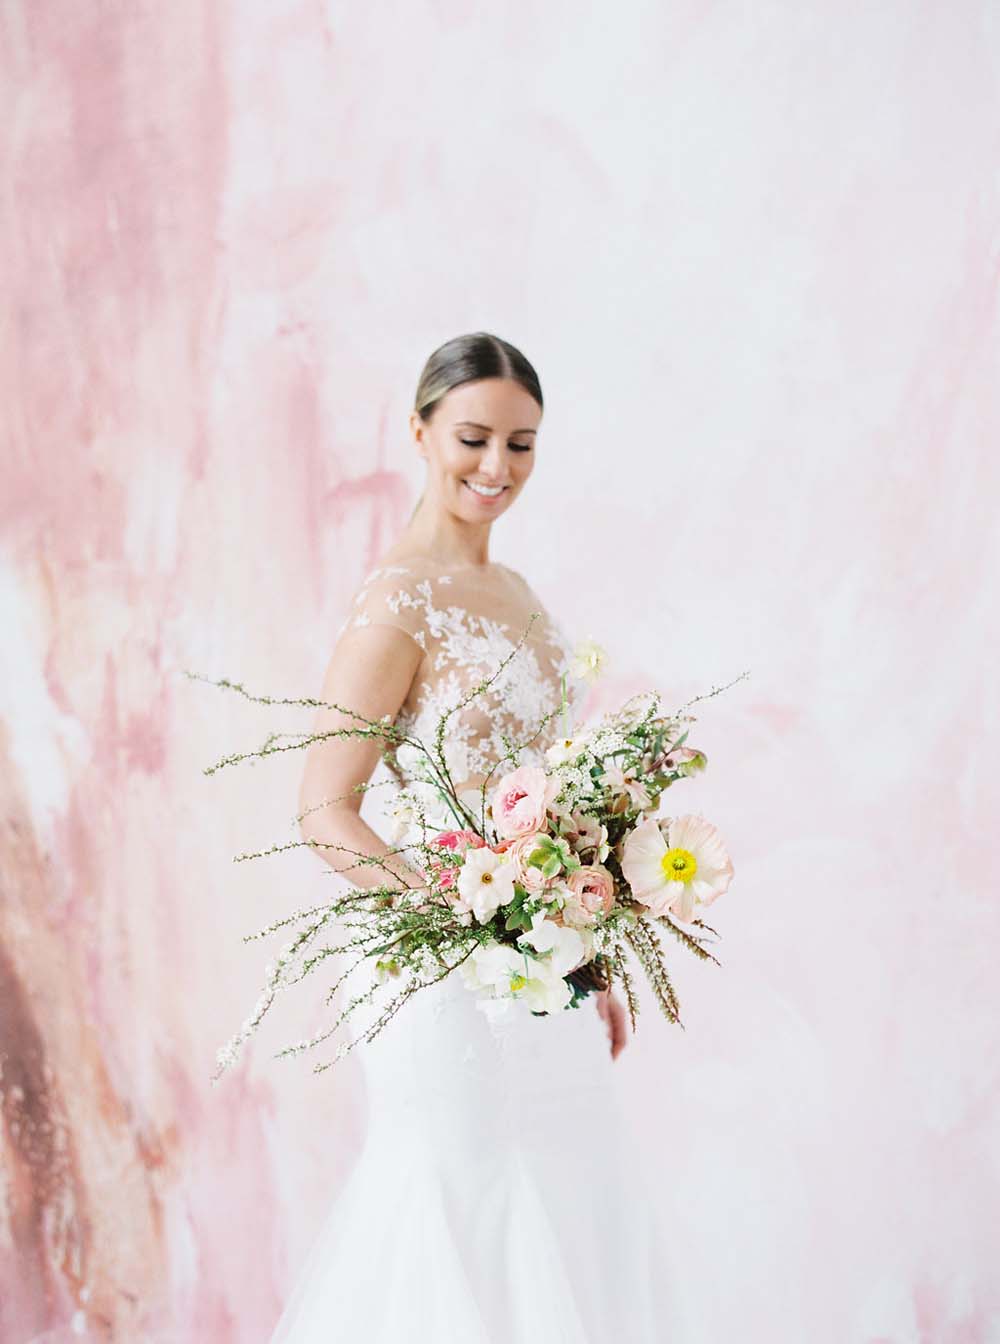 The Prettiest Inspiration For A Colourful Micro-Wedding